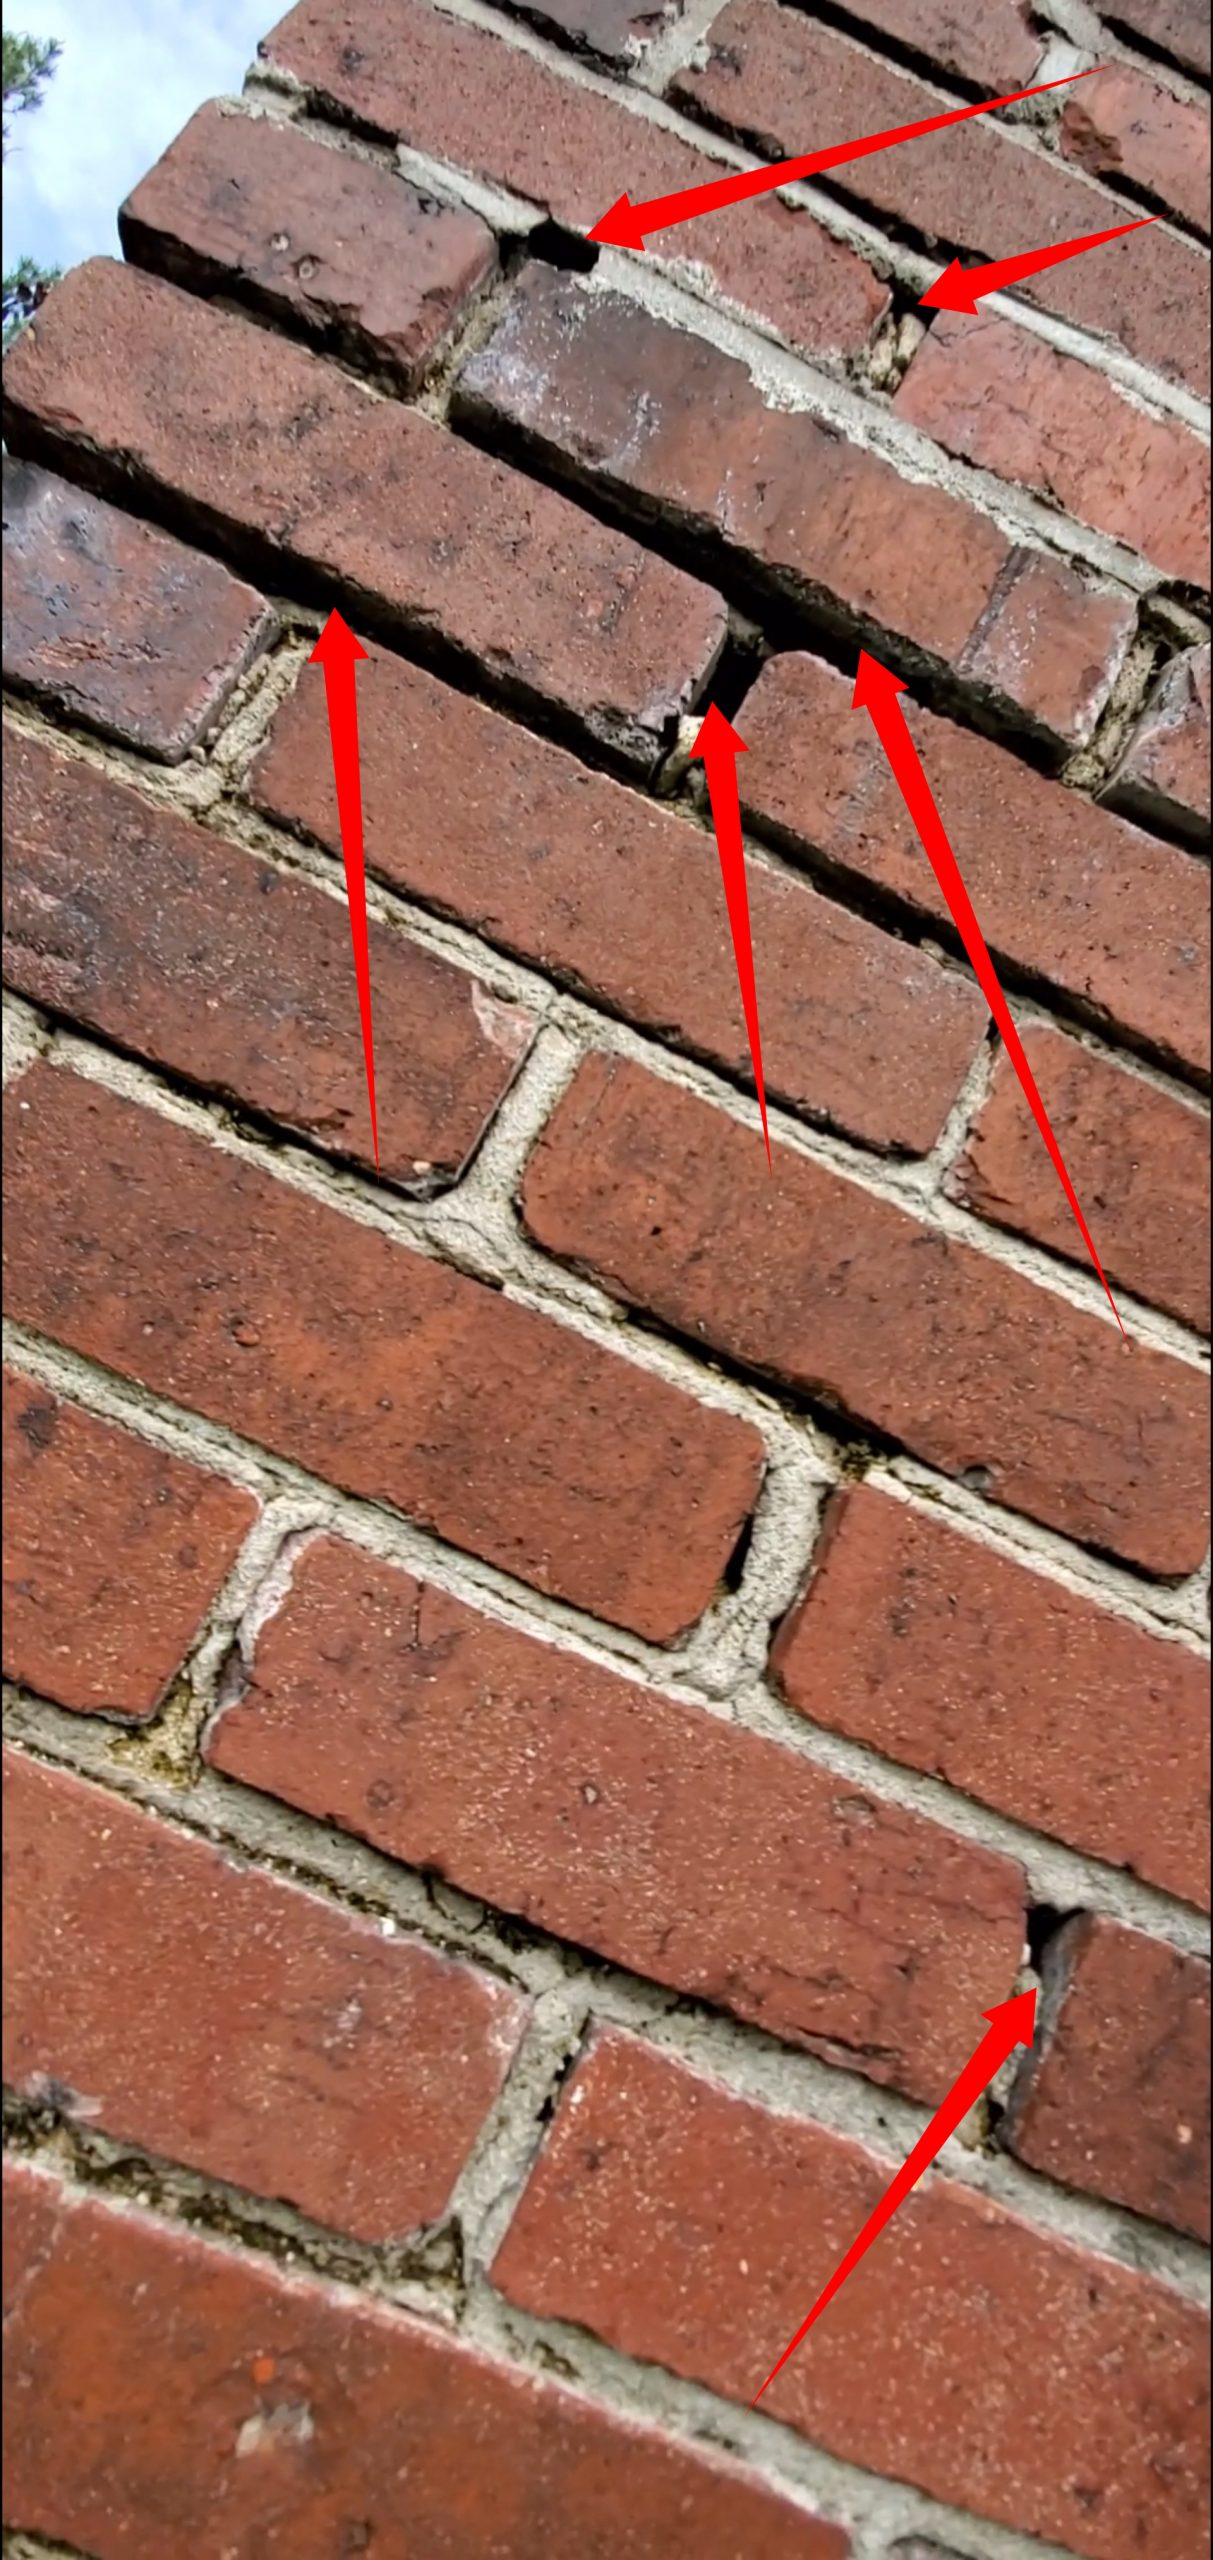 This is a picture of Holes and cracks in brick and mortar